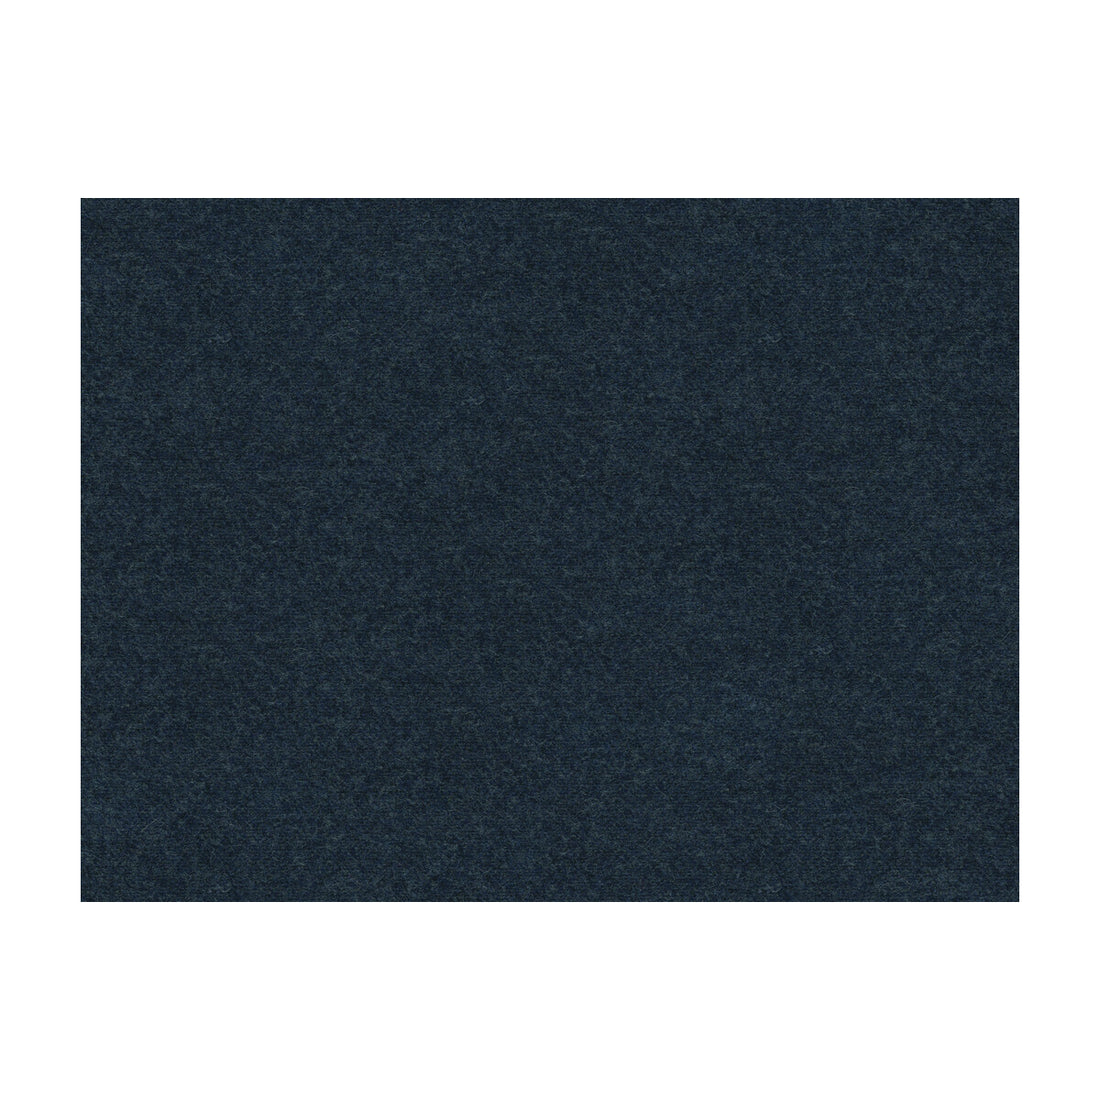 Chevalier Wool fabric in twilight color - pattern 8013149.505.0 - by Brunschwig &amp; Fils